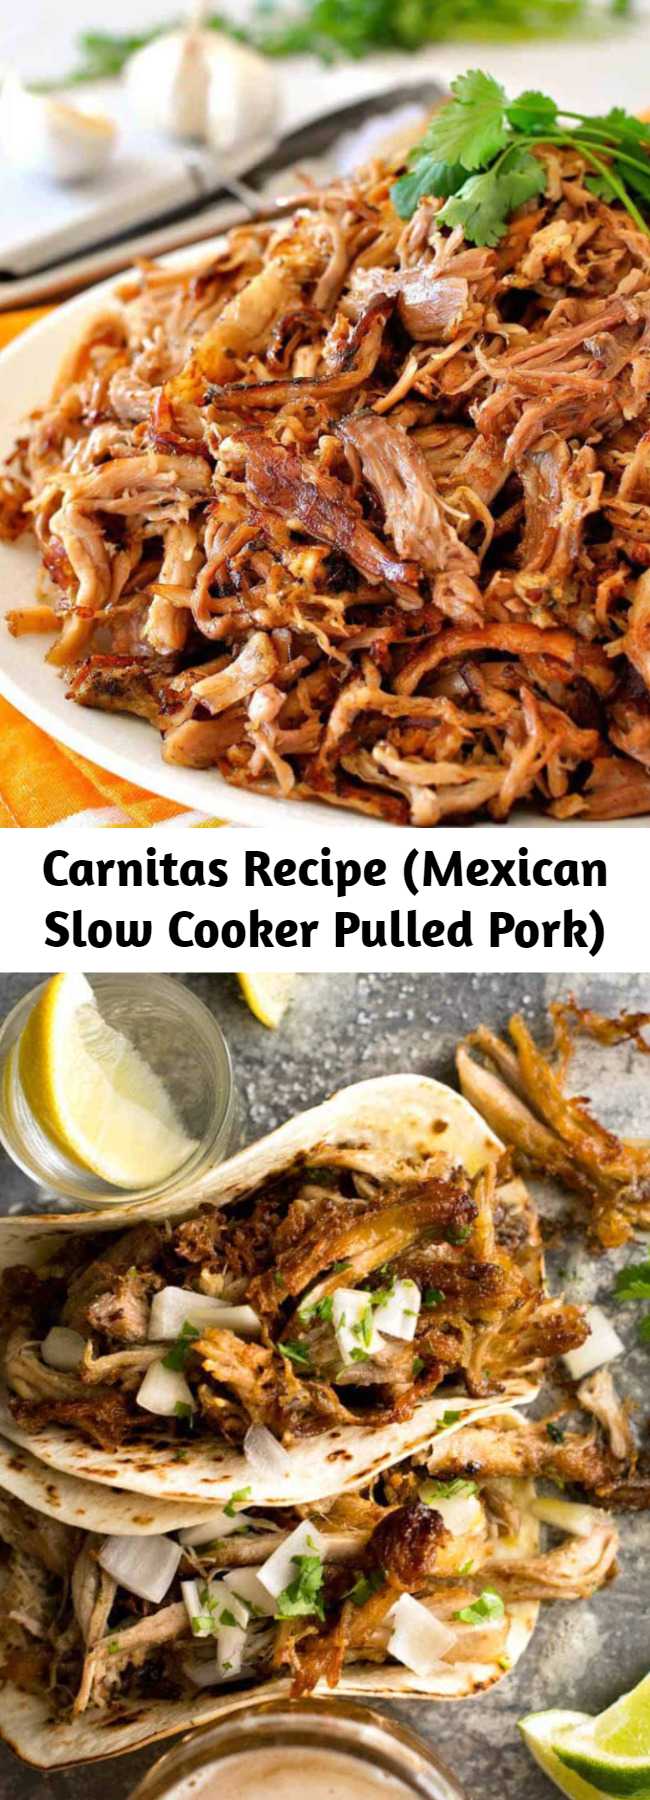 Carnitas Recipe (Mexican Slow Cooker Pulled Pork) - Super easy slow cooker Pork Carnitas (Mexican Pulled Pork) and the BEST way to get the brown bits! Every tortilla dreams of being stuffed with Carnitas. The best of the best of Mexican food, seasoned pork is slow cooked until tender before gently teasing apart with forks and pan frying to golden, crispy perfection. #crockpot